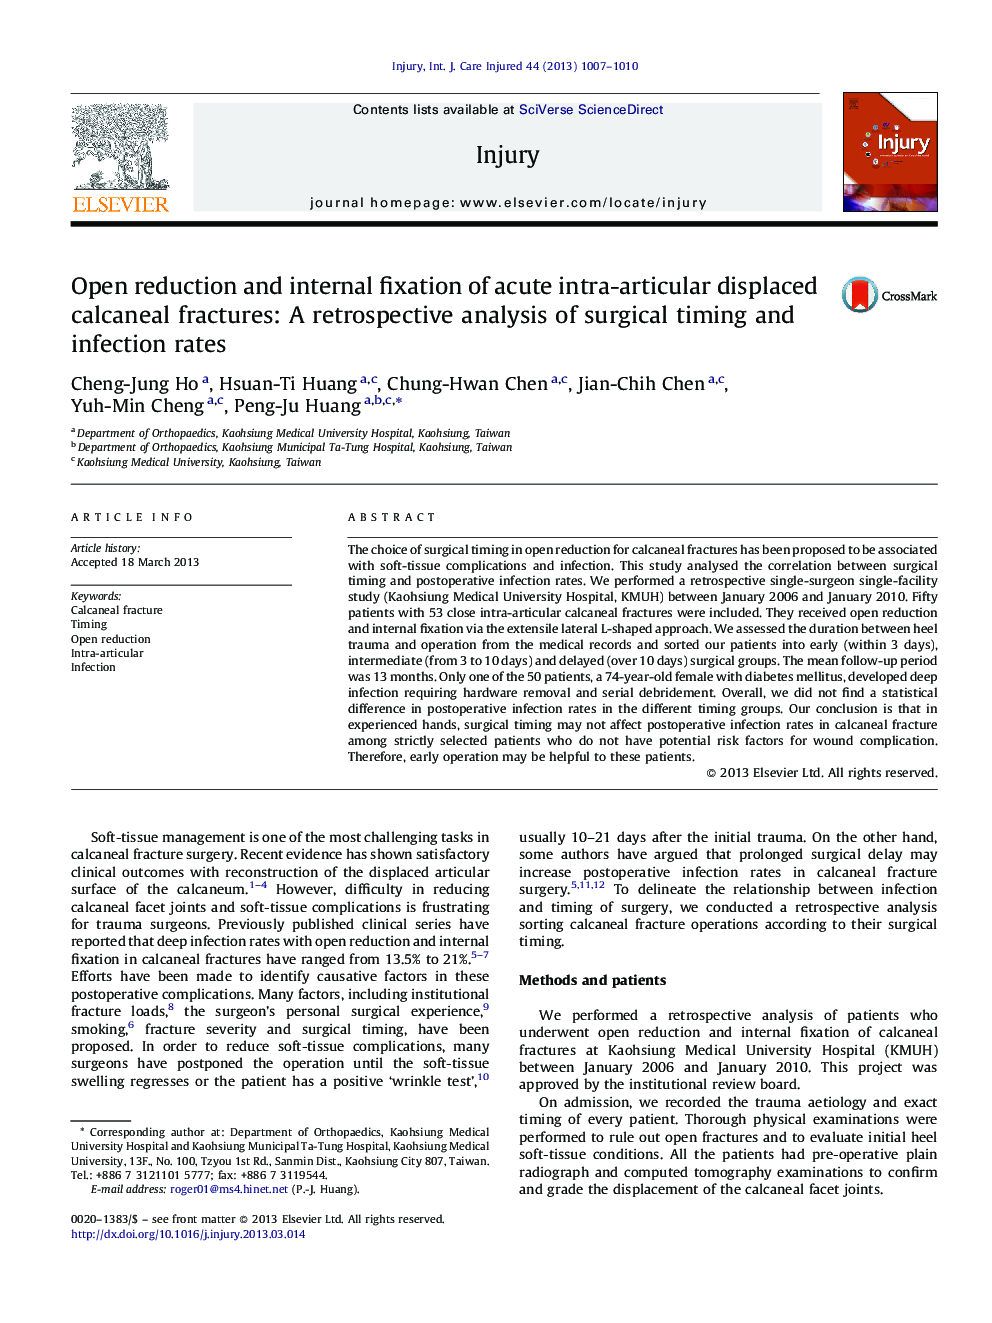 Open reduction and internal fixation of acute intra-articular displaced calcaneal fractures: A retrospective analysis of surgical timing and infection rates